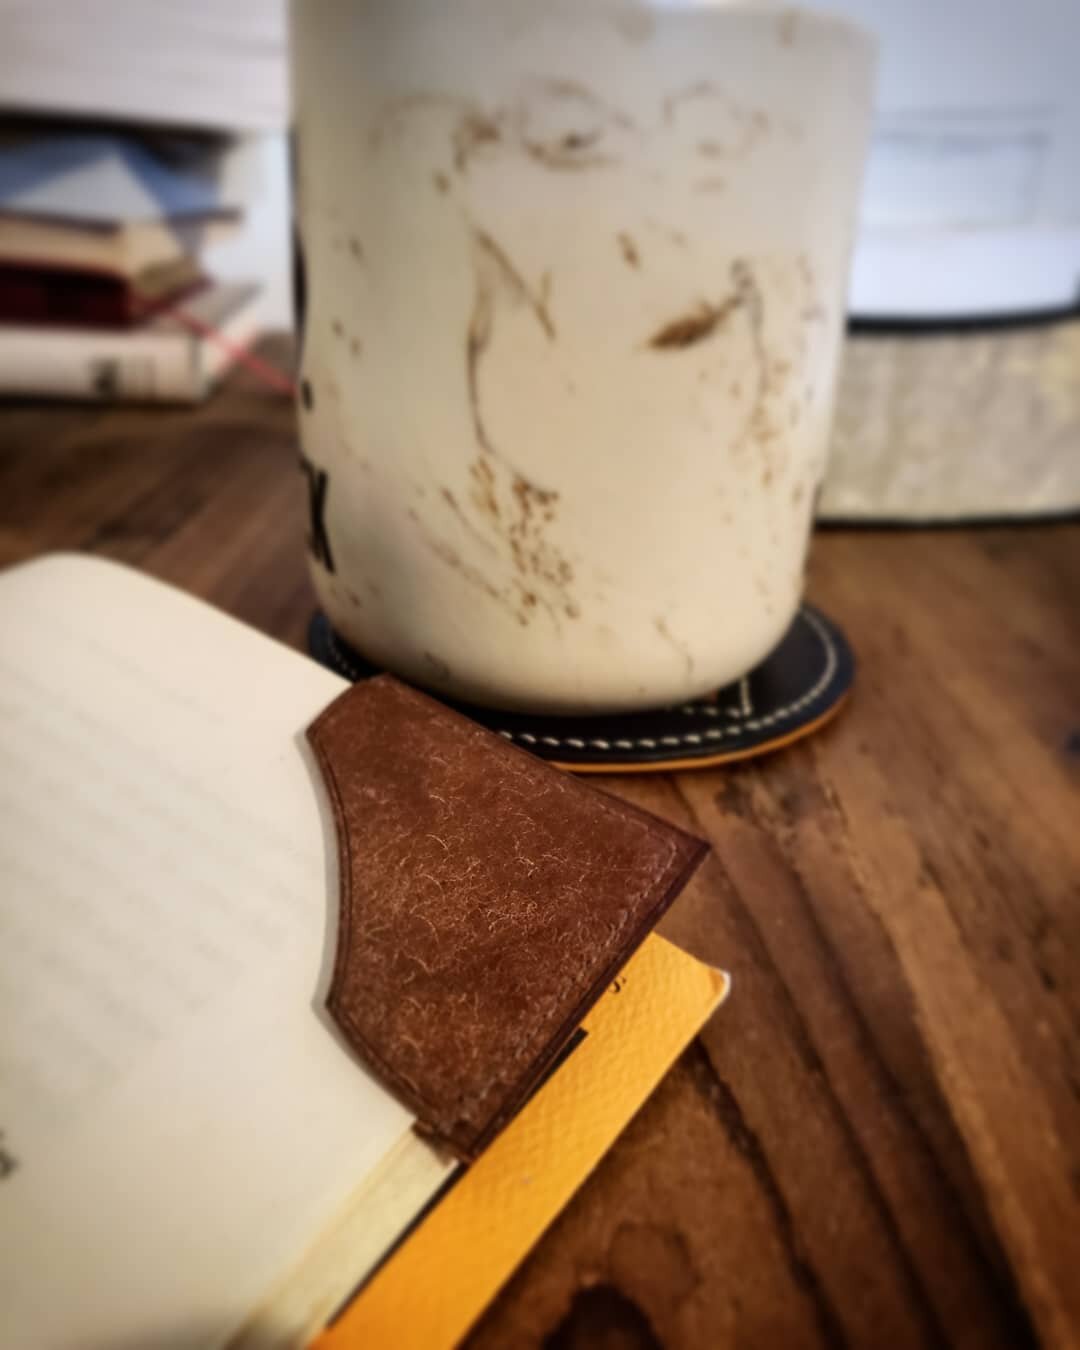 Always easy to pick up where I left off. 

#bookmark #simple #reading #morning #coffee #quiettime #relaxing #goodstart #leather #coaster #leatherwork